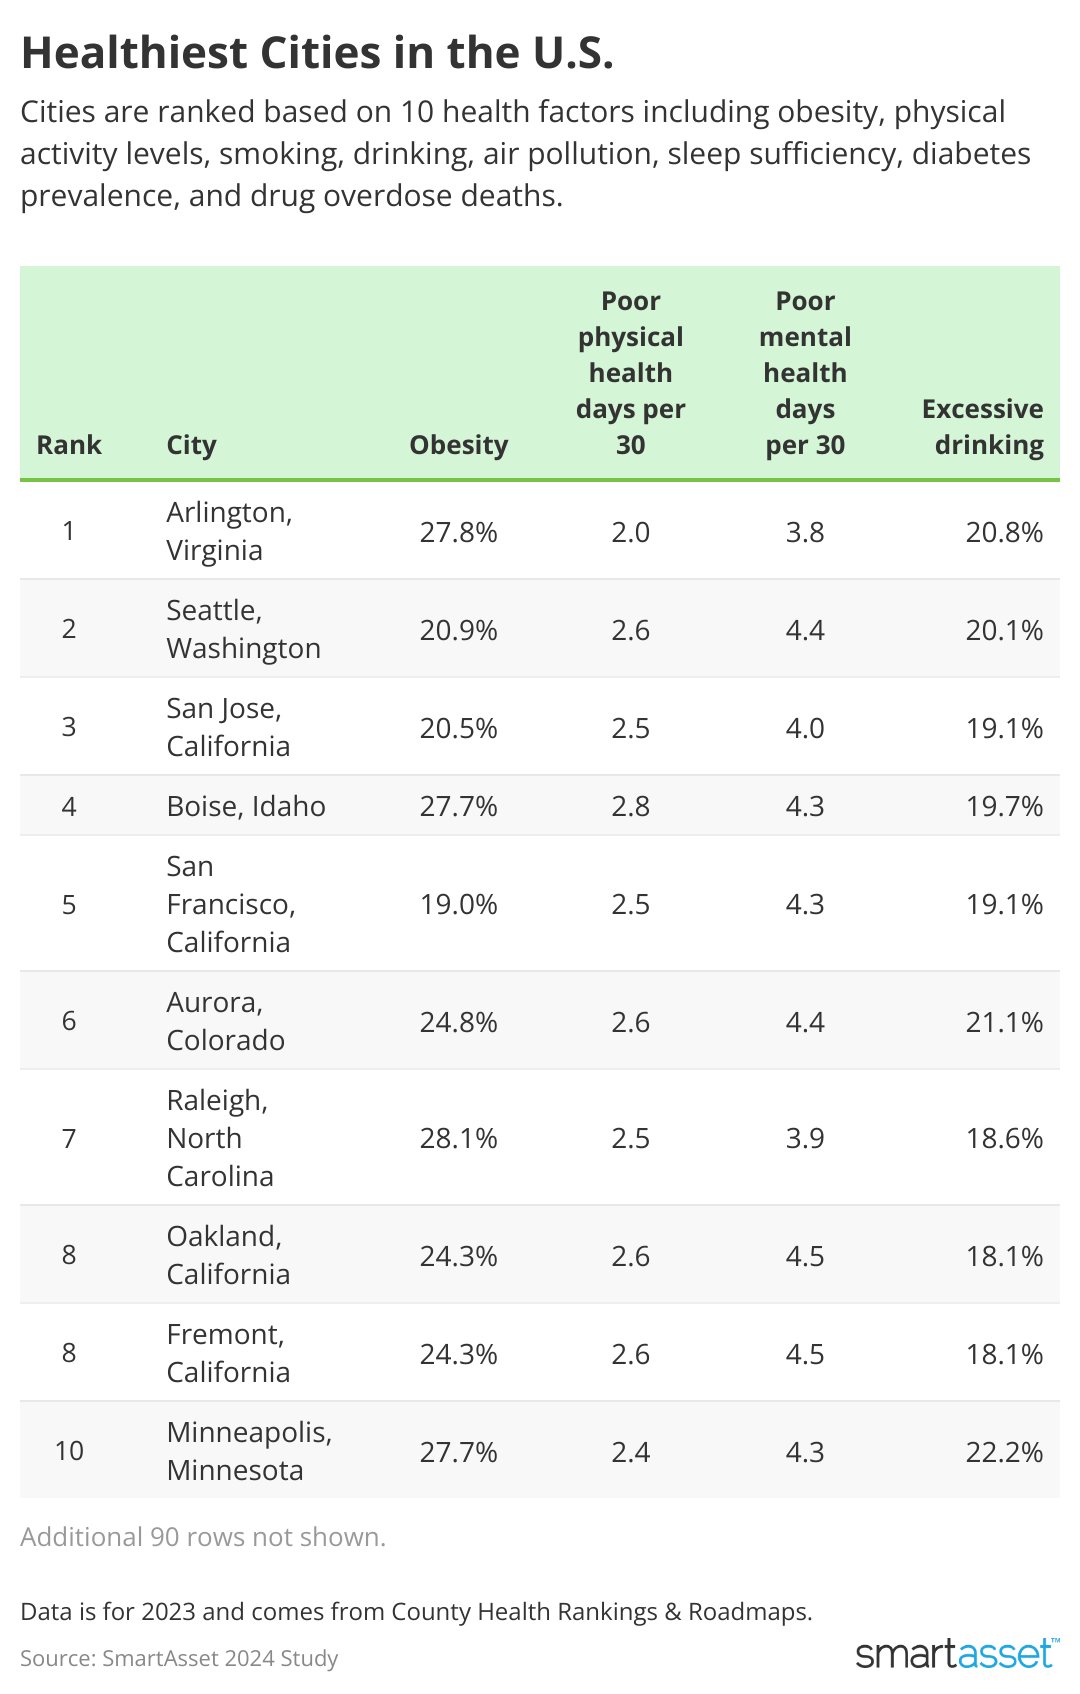 table showing Top 10 cities Healthiest Cities in the U.S.